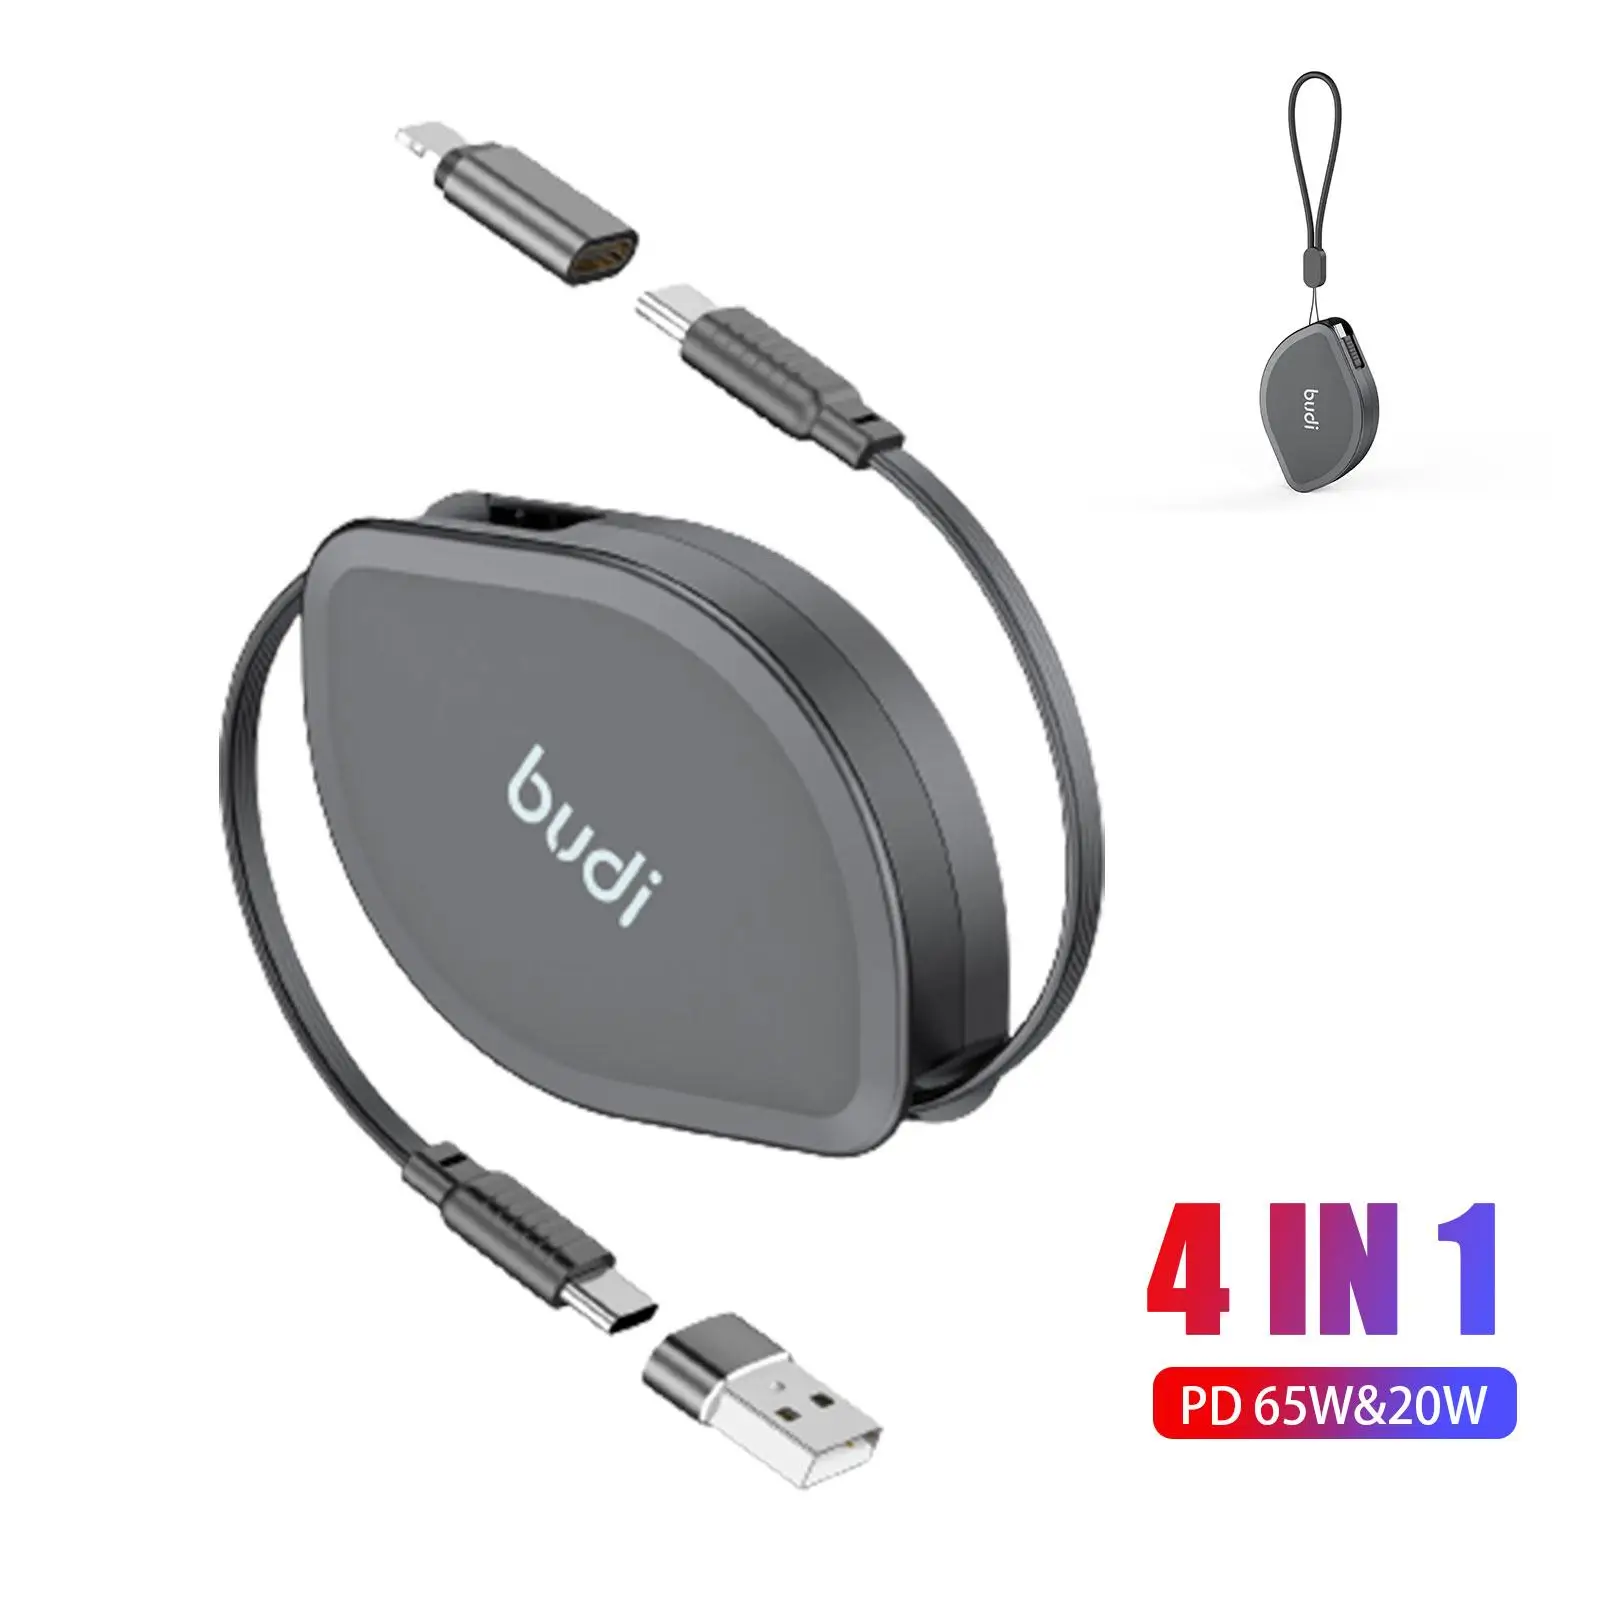 

BUDI 4 In1 PD 65W&20W Retractable USB C PD Type C High-speed Charge Sync Cable Fast Charging Mobile Phone Accessories For I D1J4